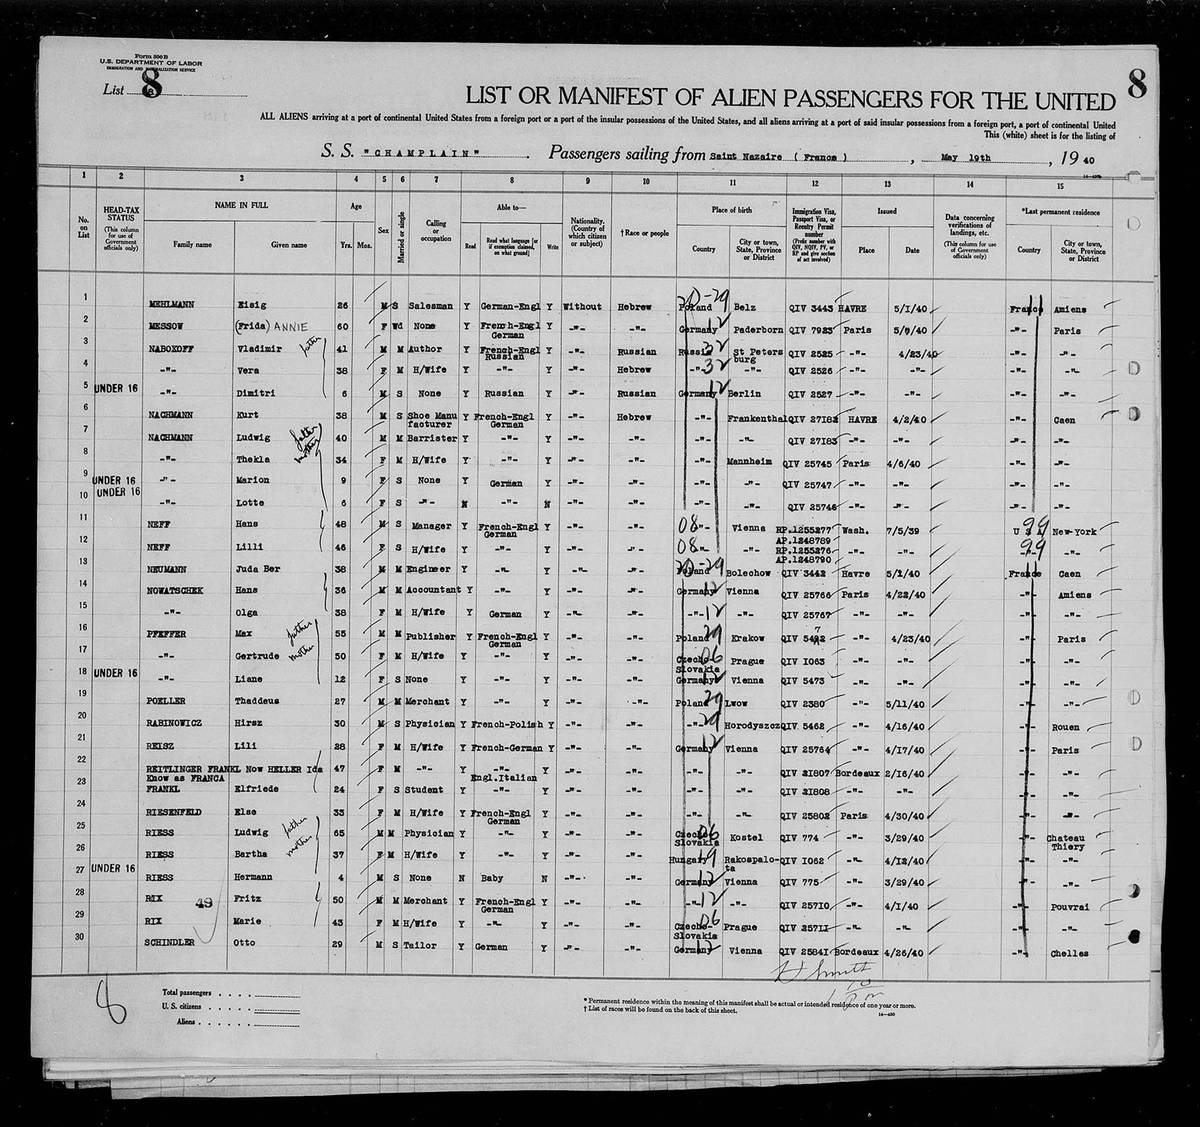 List 8 of the manifest of the S.S. Champlain, May 19, 1940